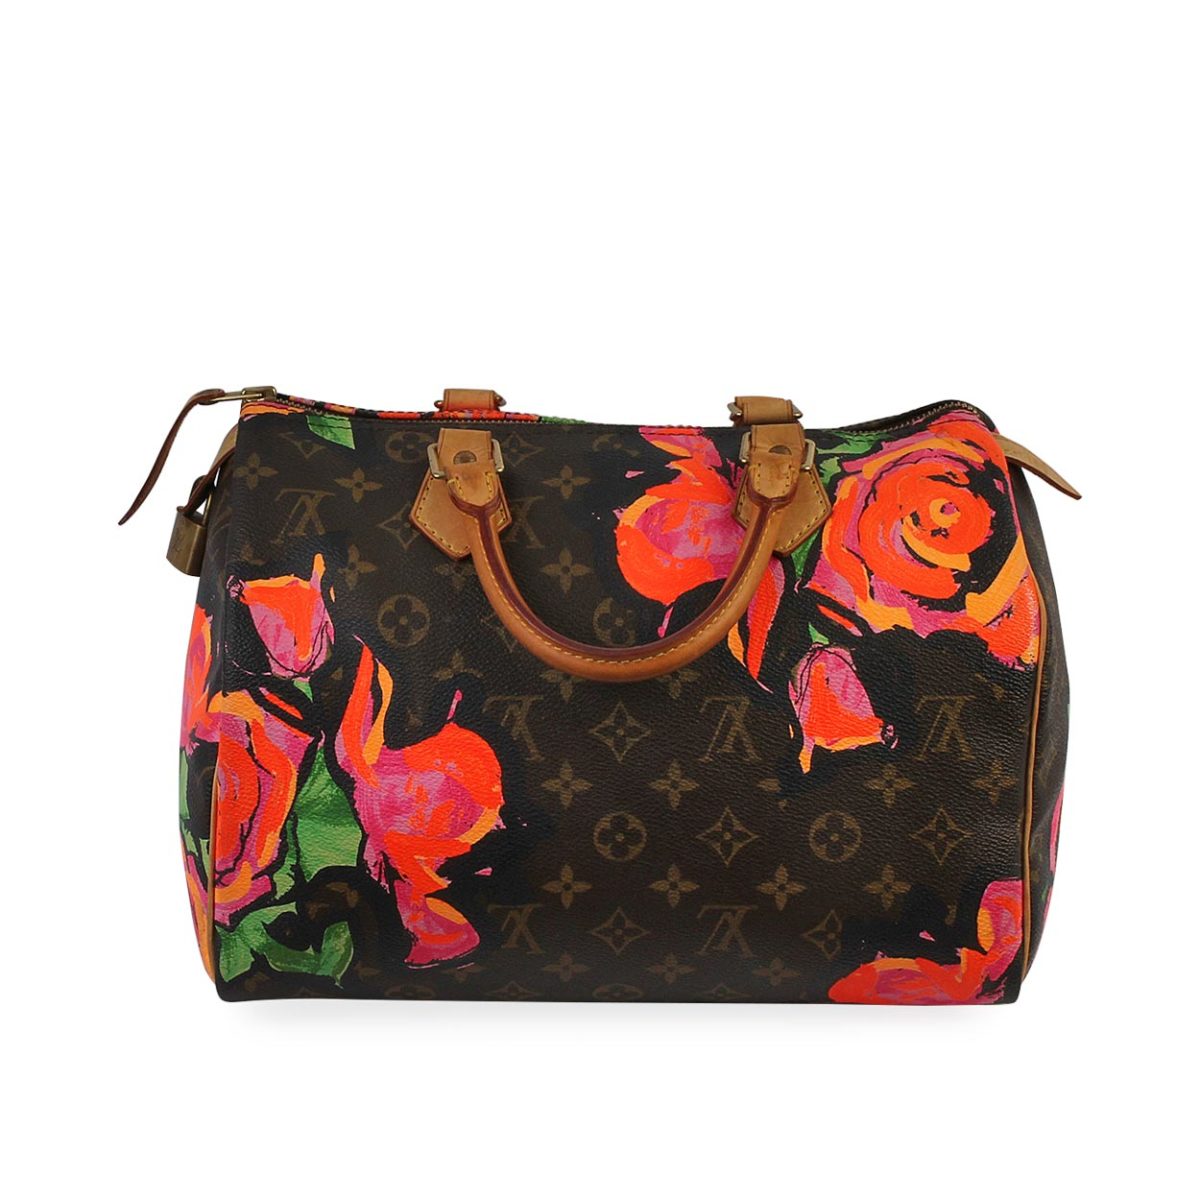 LOUIS VUITTON Monogram Roses Speedy 30 - Limited Edition | Luxity